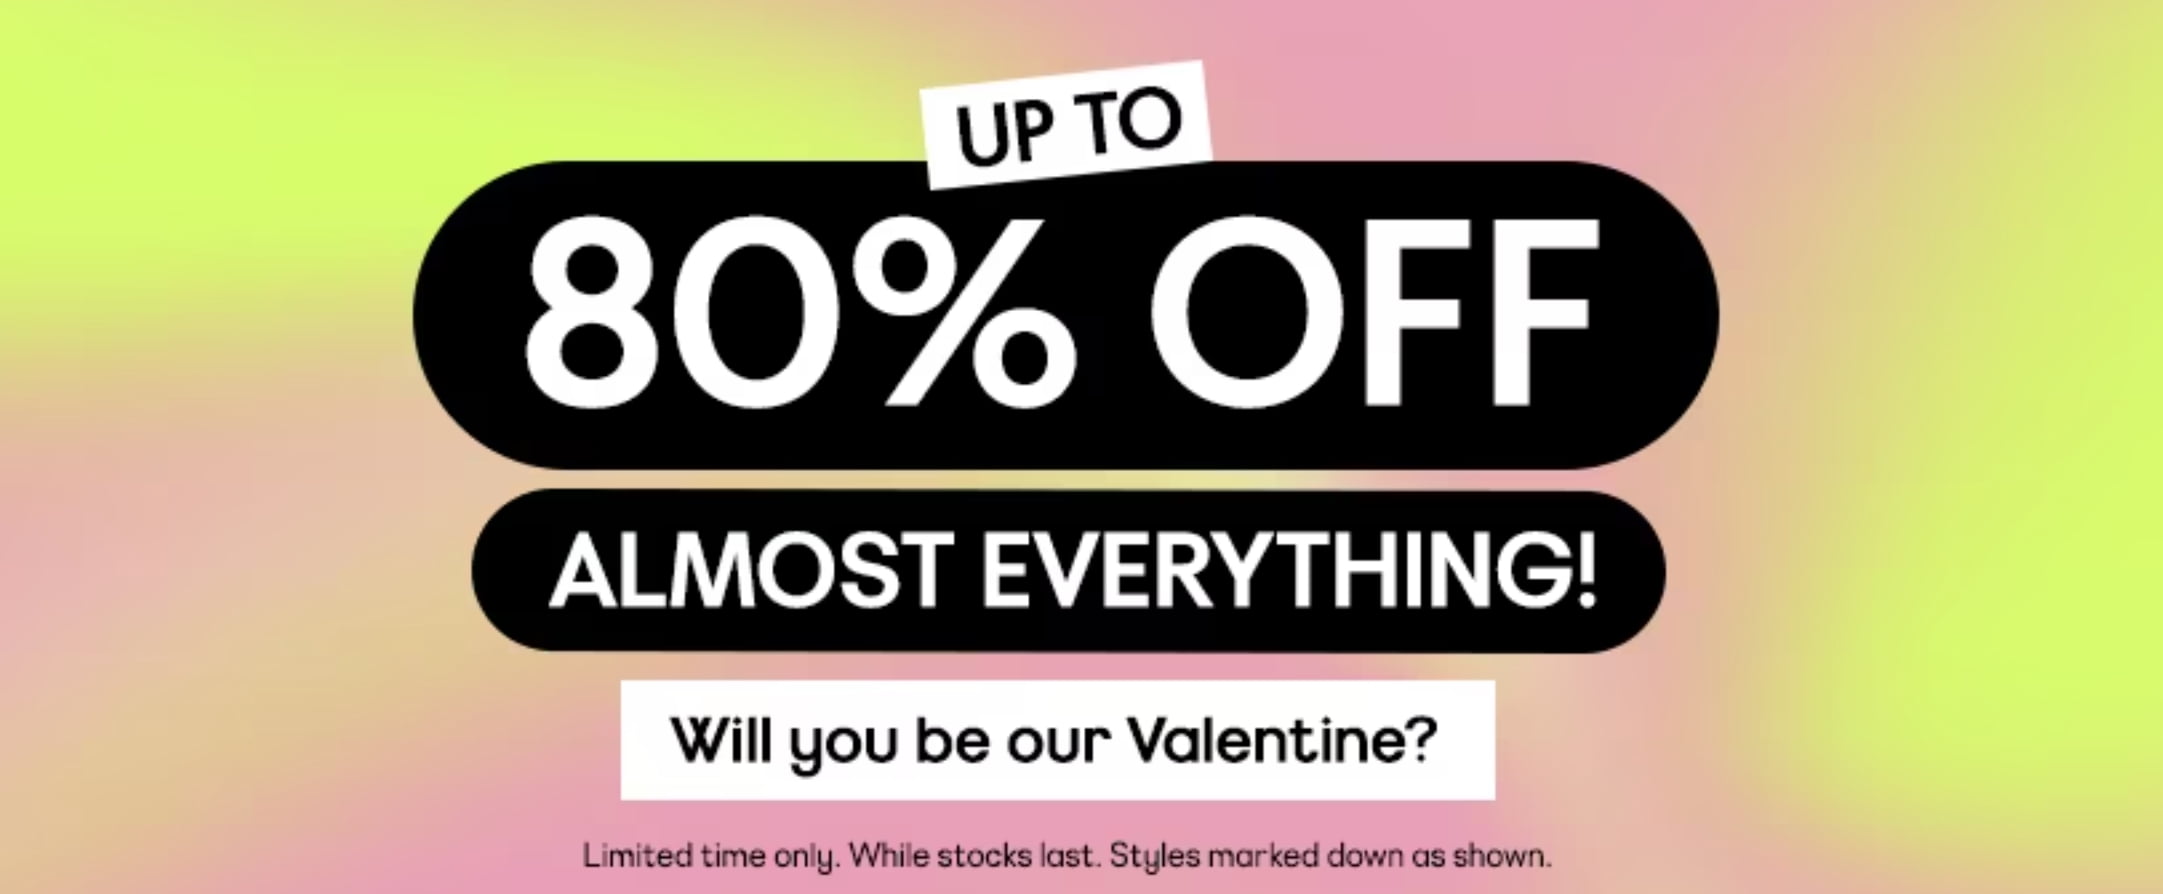 Up to 80% almost everything at ASOS